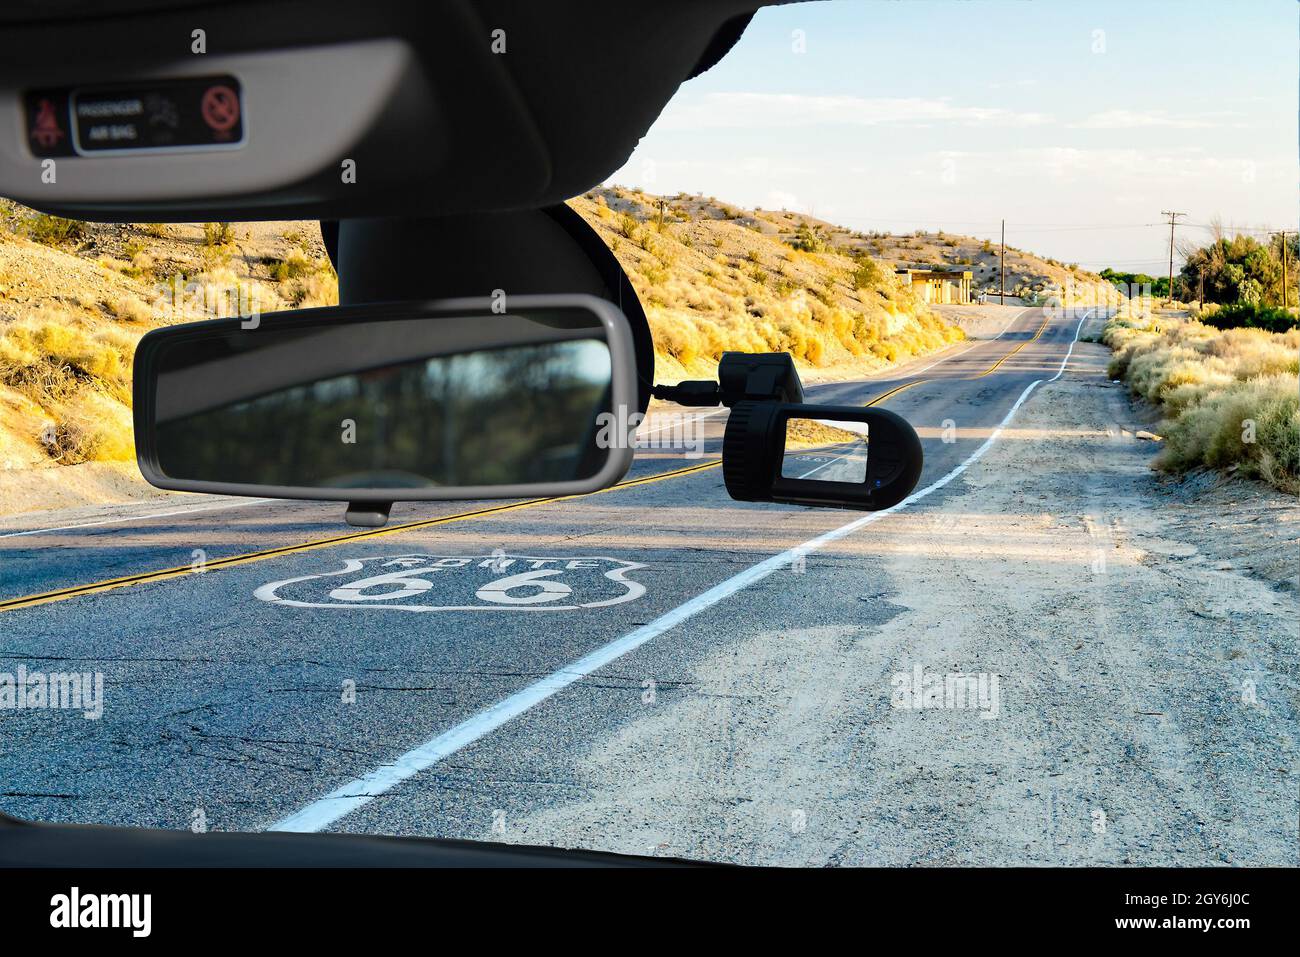 https://c8.alamy.com/comp/2GY6J0C/looking-through-a-dashcam-car-camera-installed-on-a-windshield-with-view-of-the-historic-route-66-with-pavement-sign-in-california-usa-2GY6J0C.jpg